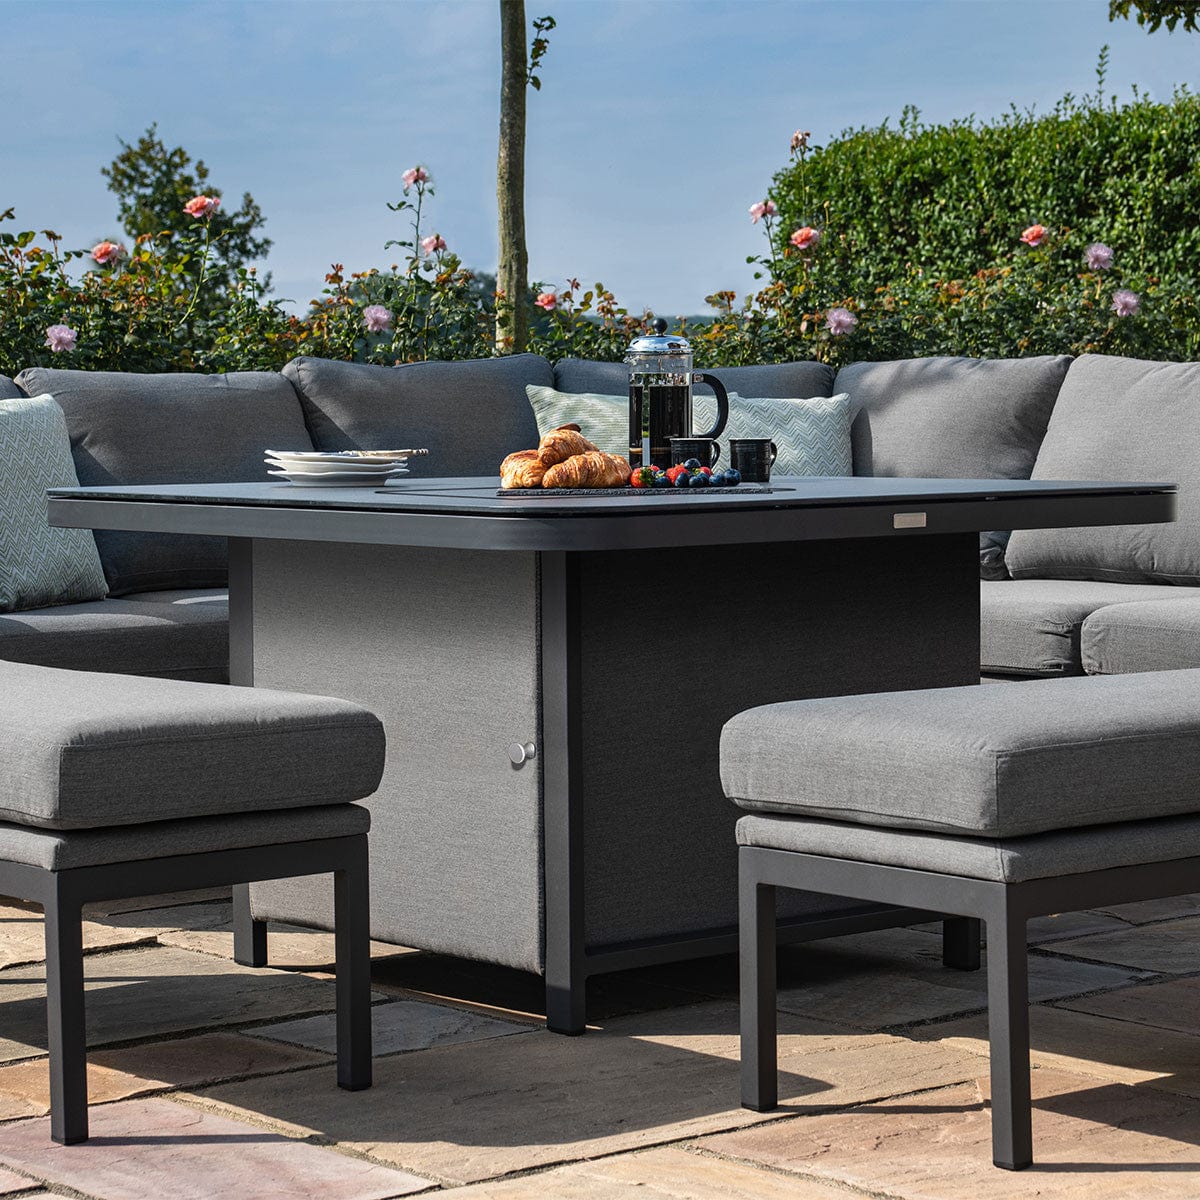 Maze Outdoors Pulse Deluxe Square Corner Dining Set - with Fire Pit Table / Flanelle House of Isabella UK